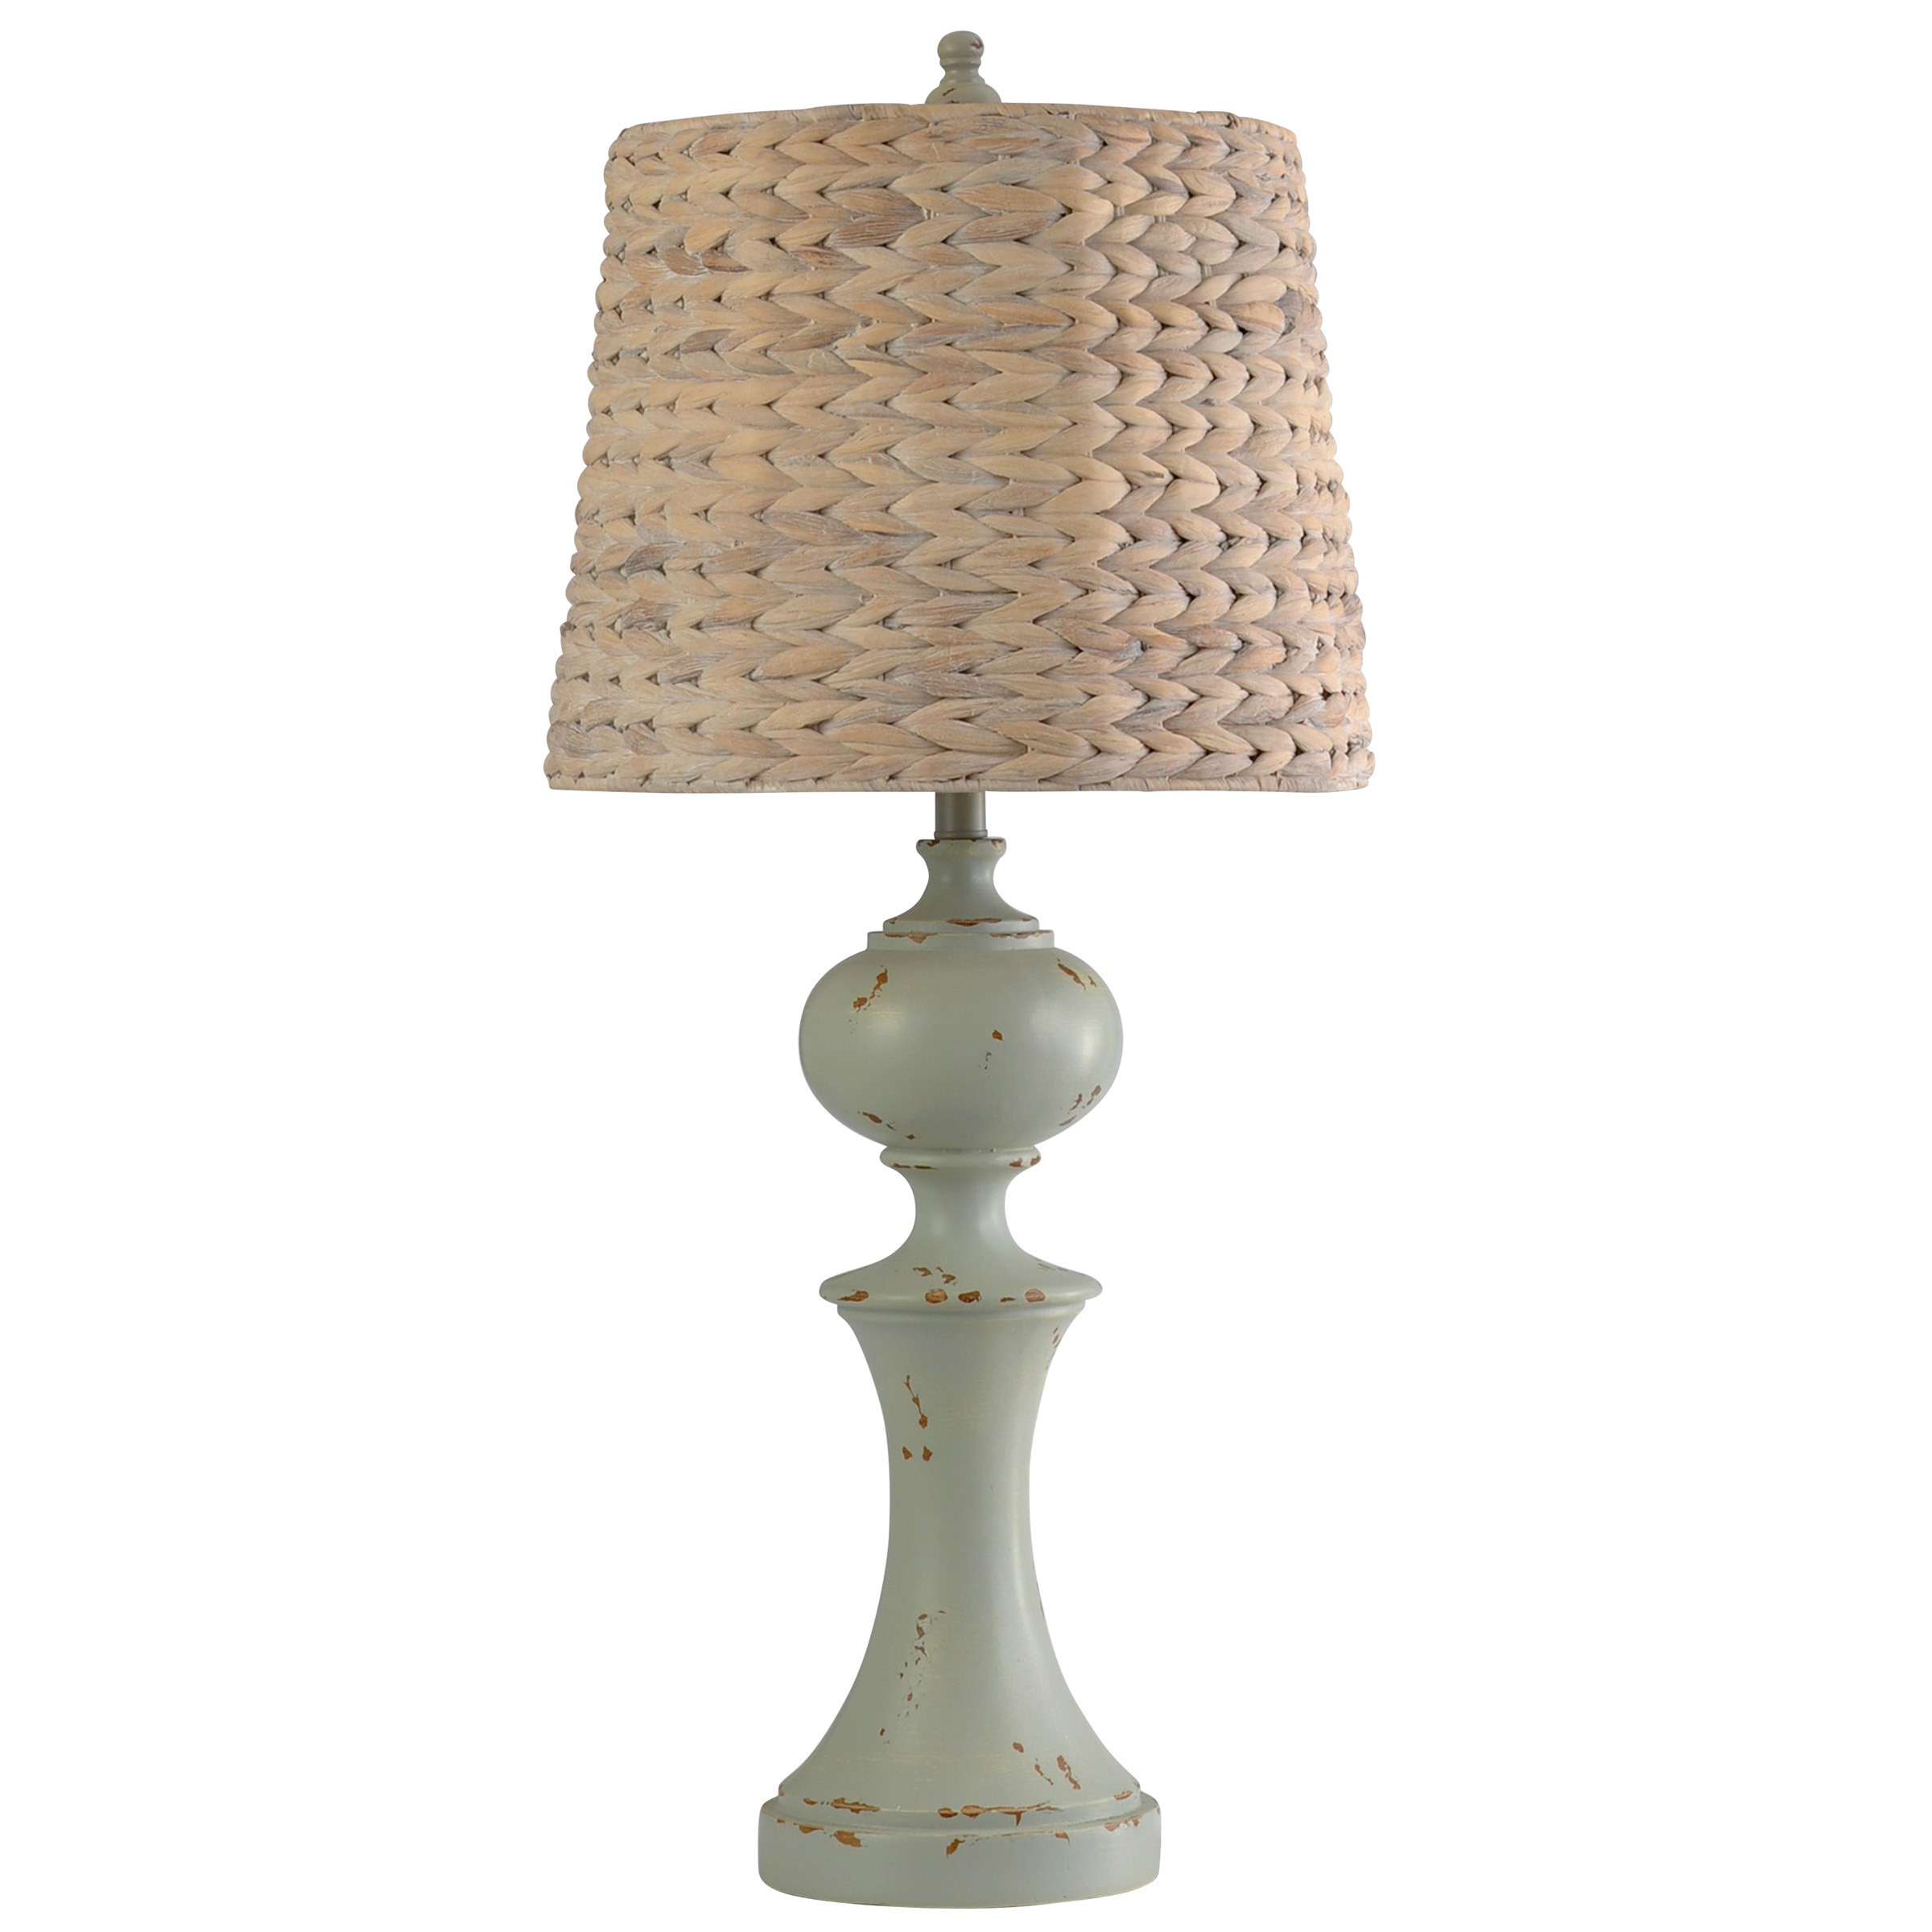 Basilica sky traditional table lamp natural seagrass